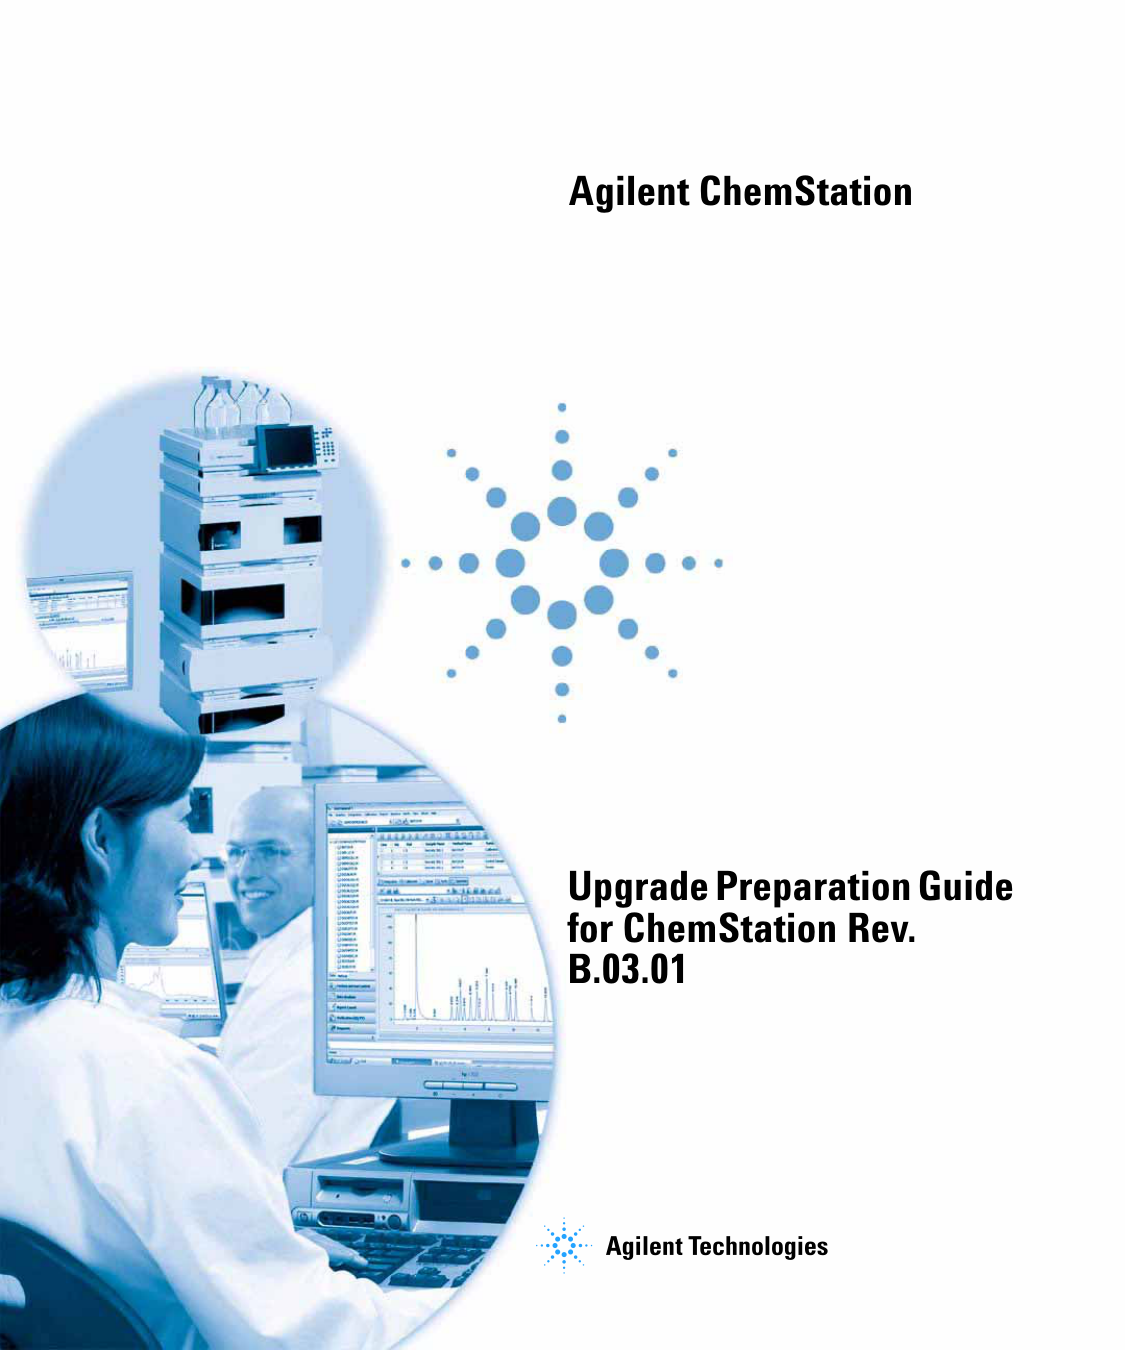 how to determine peak purity in agilent chemstation